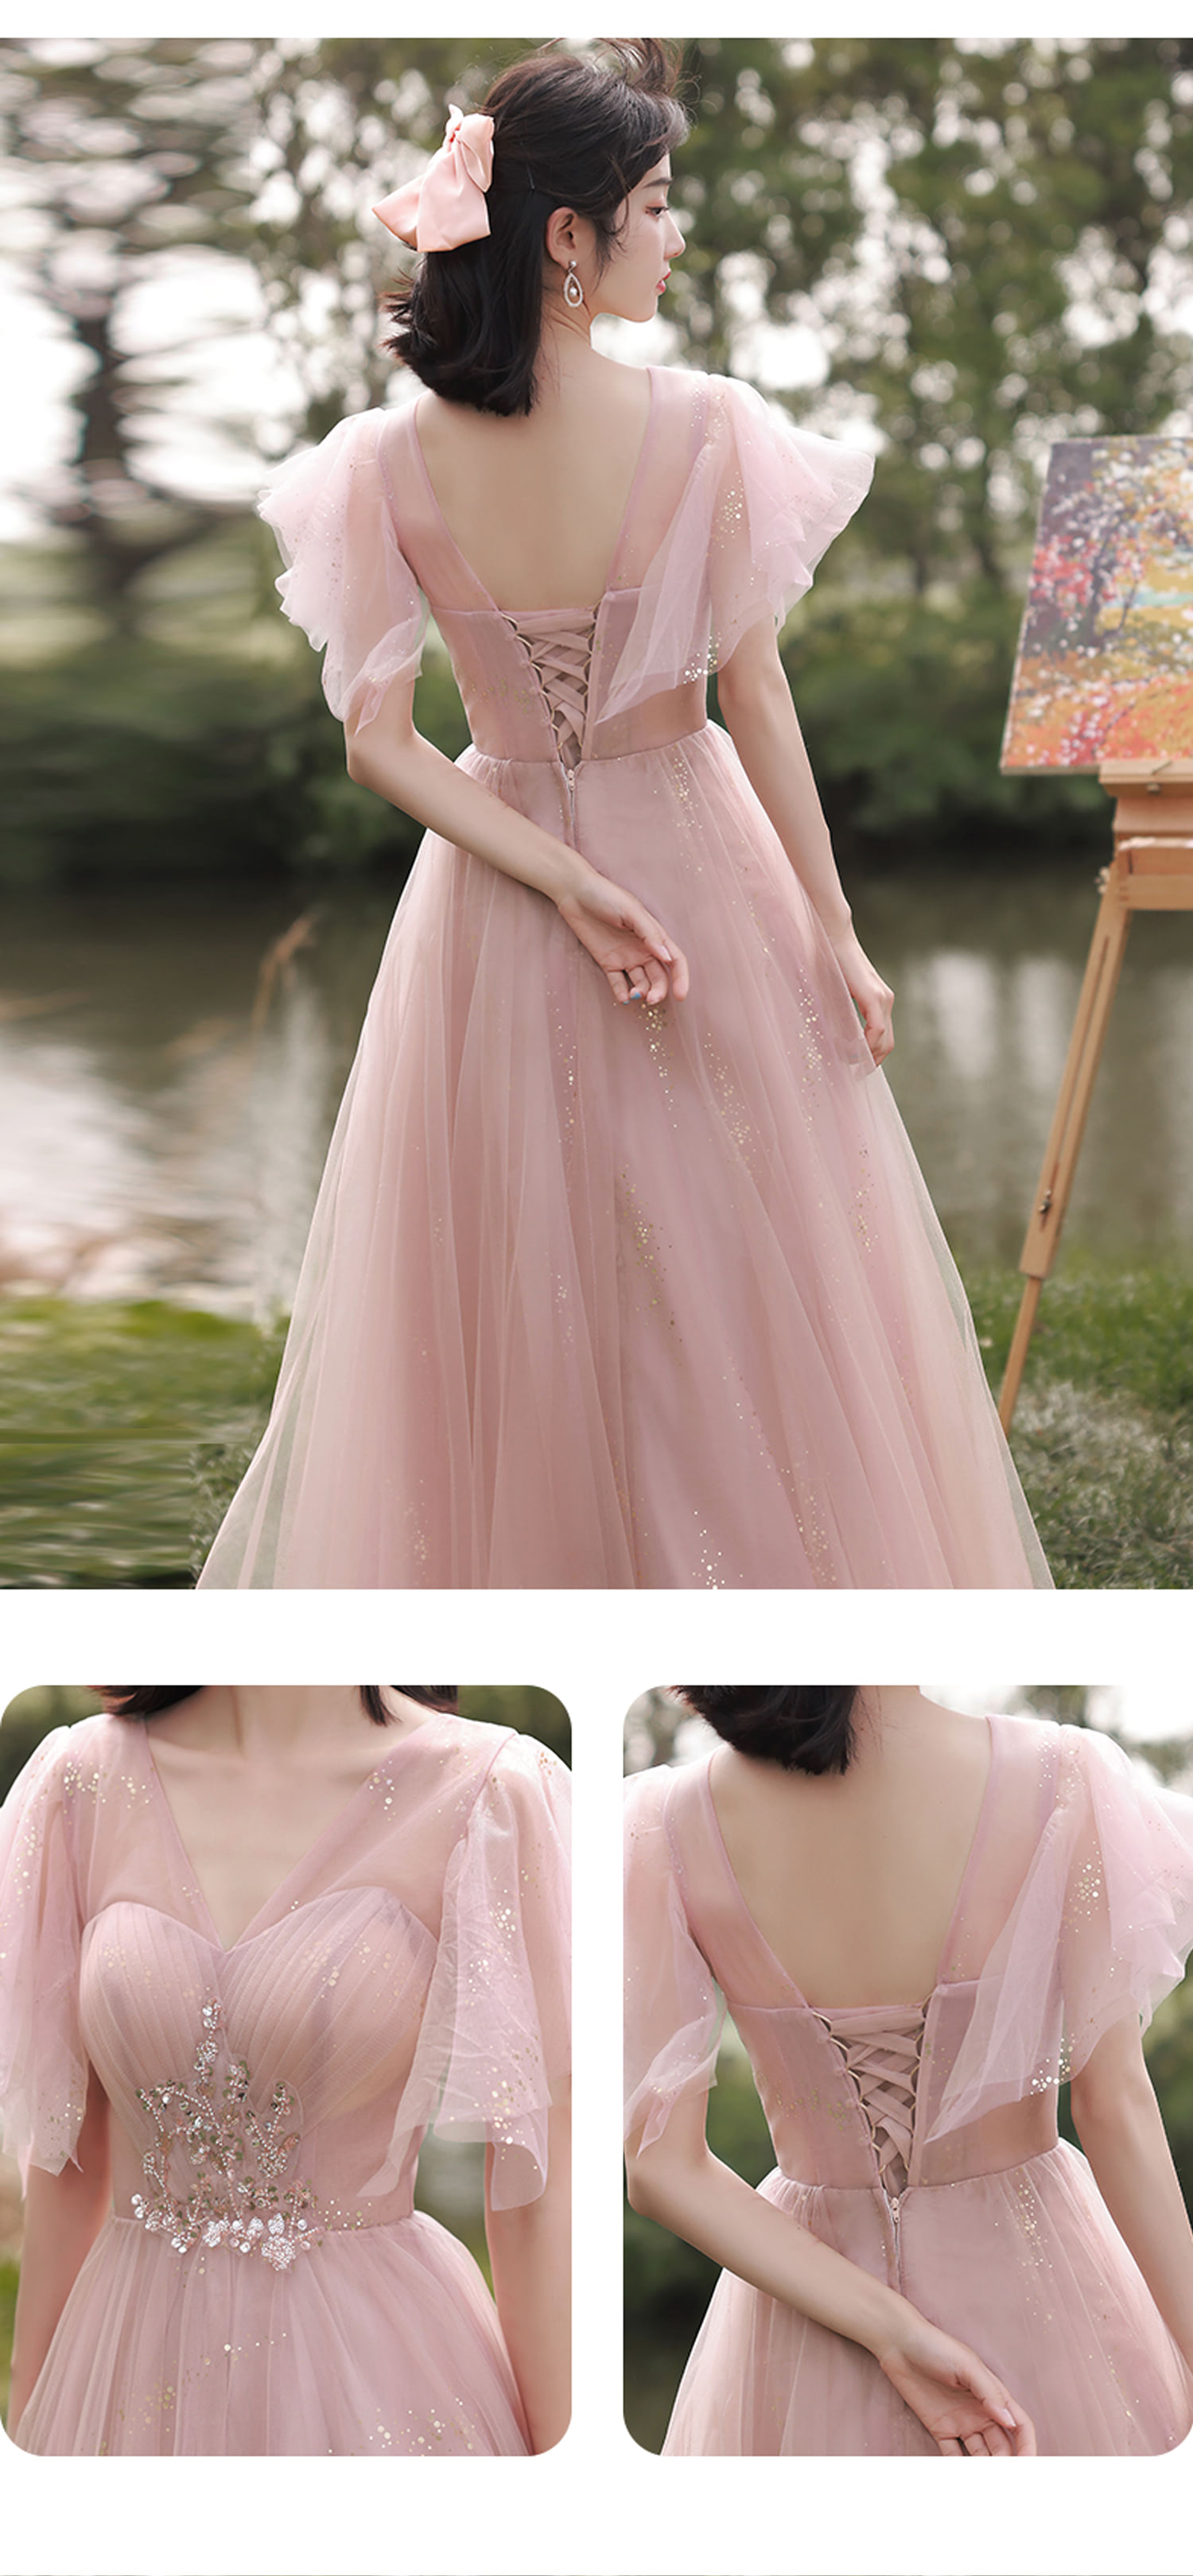 Romantic-Pink-Bridal-Party-Dress-Elegant-Occasions-Formal-Gown23.jpg